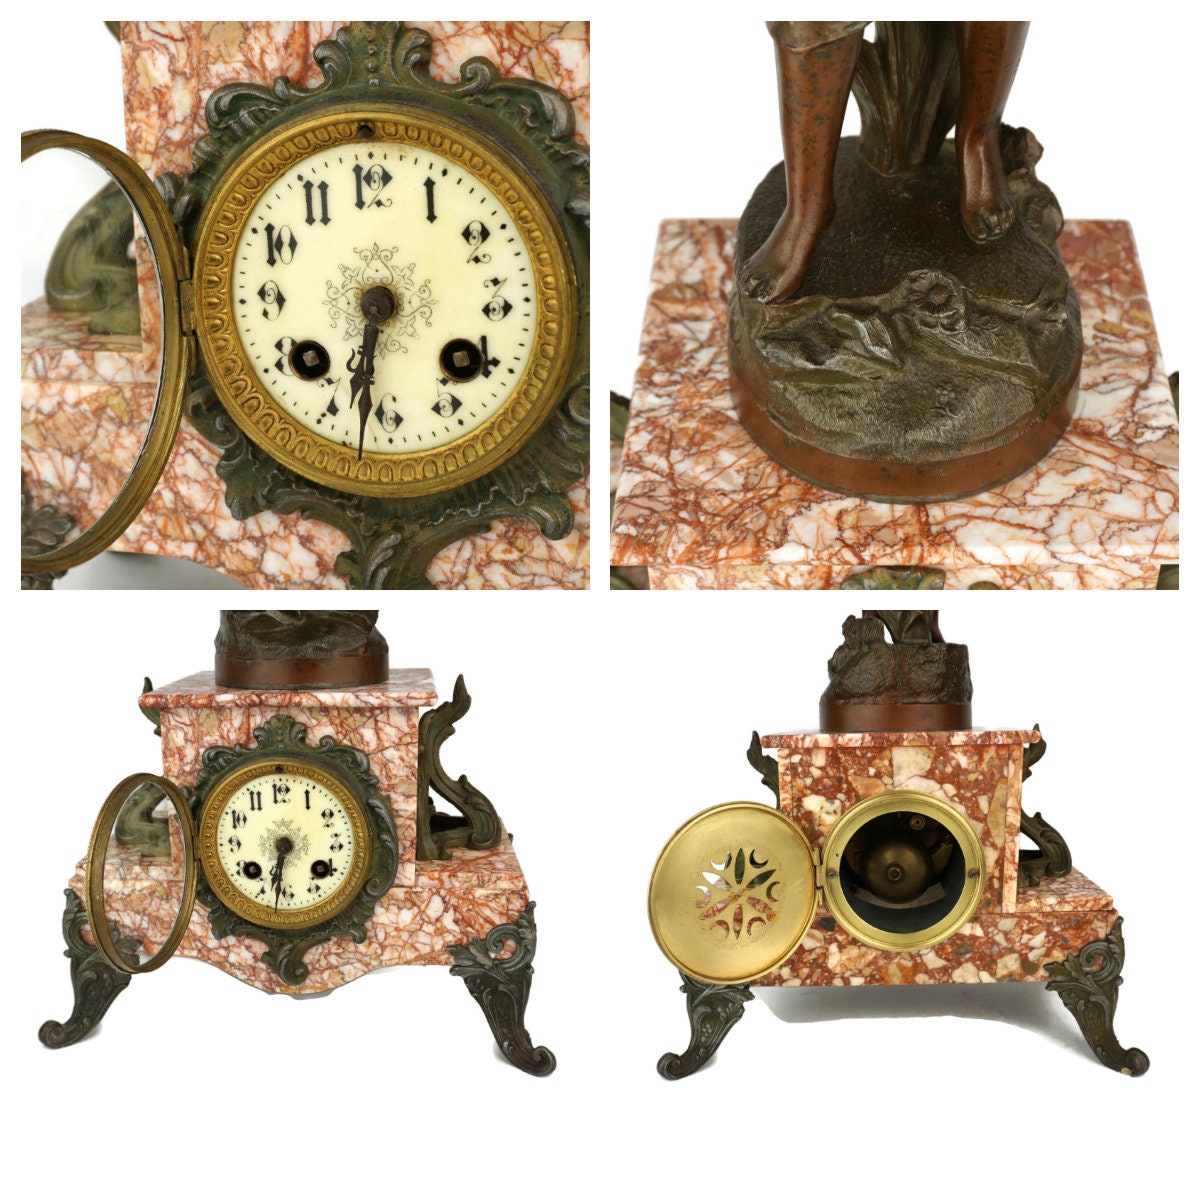 19th Century French Mantle Clock - Mantel Clocks - Hemswell Antique Centres